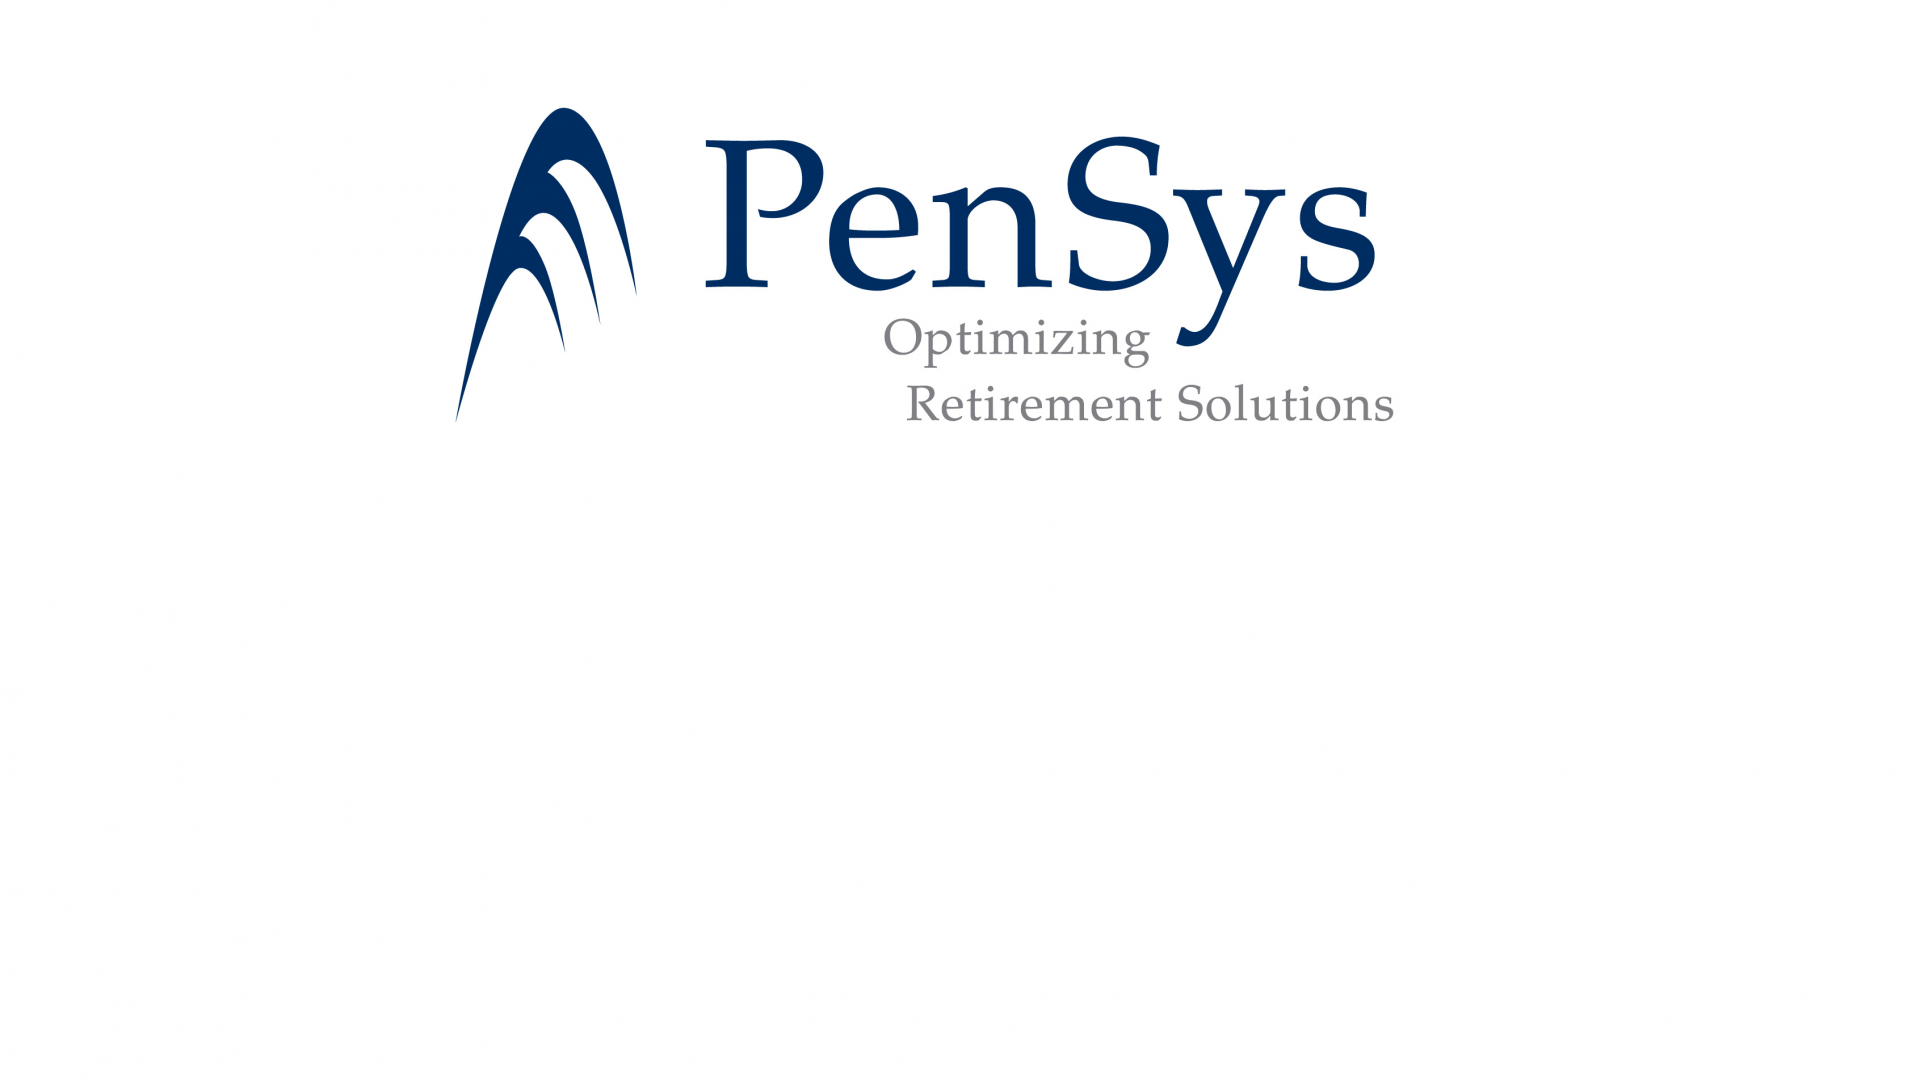 Ascensus Logo - Ascensus Enters into Agreement to Acquire PenSys - Ascensus